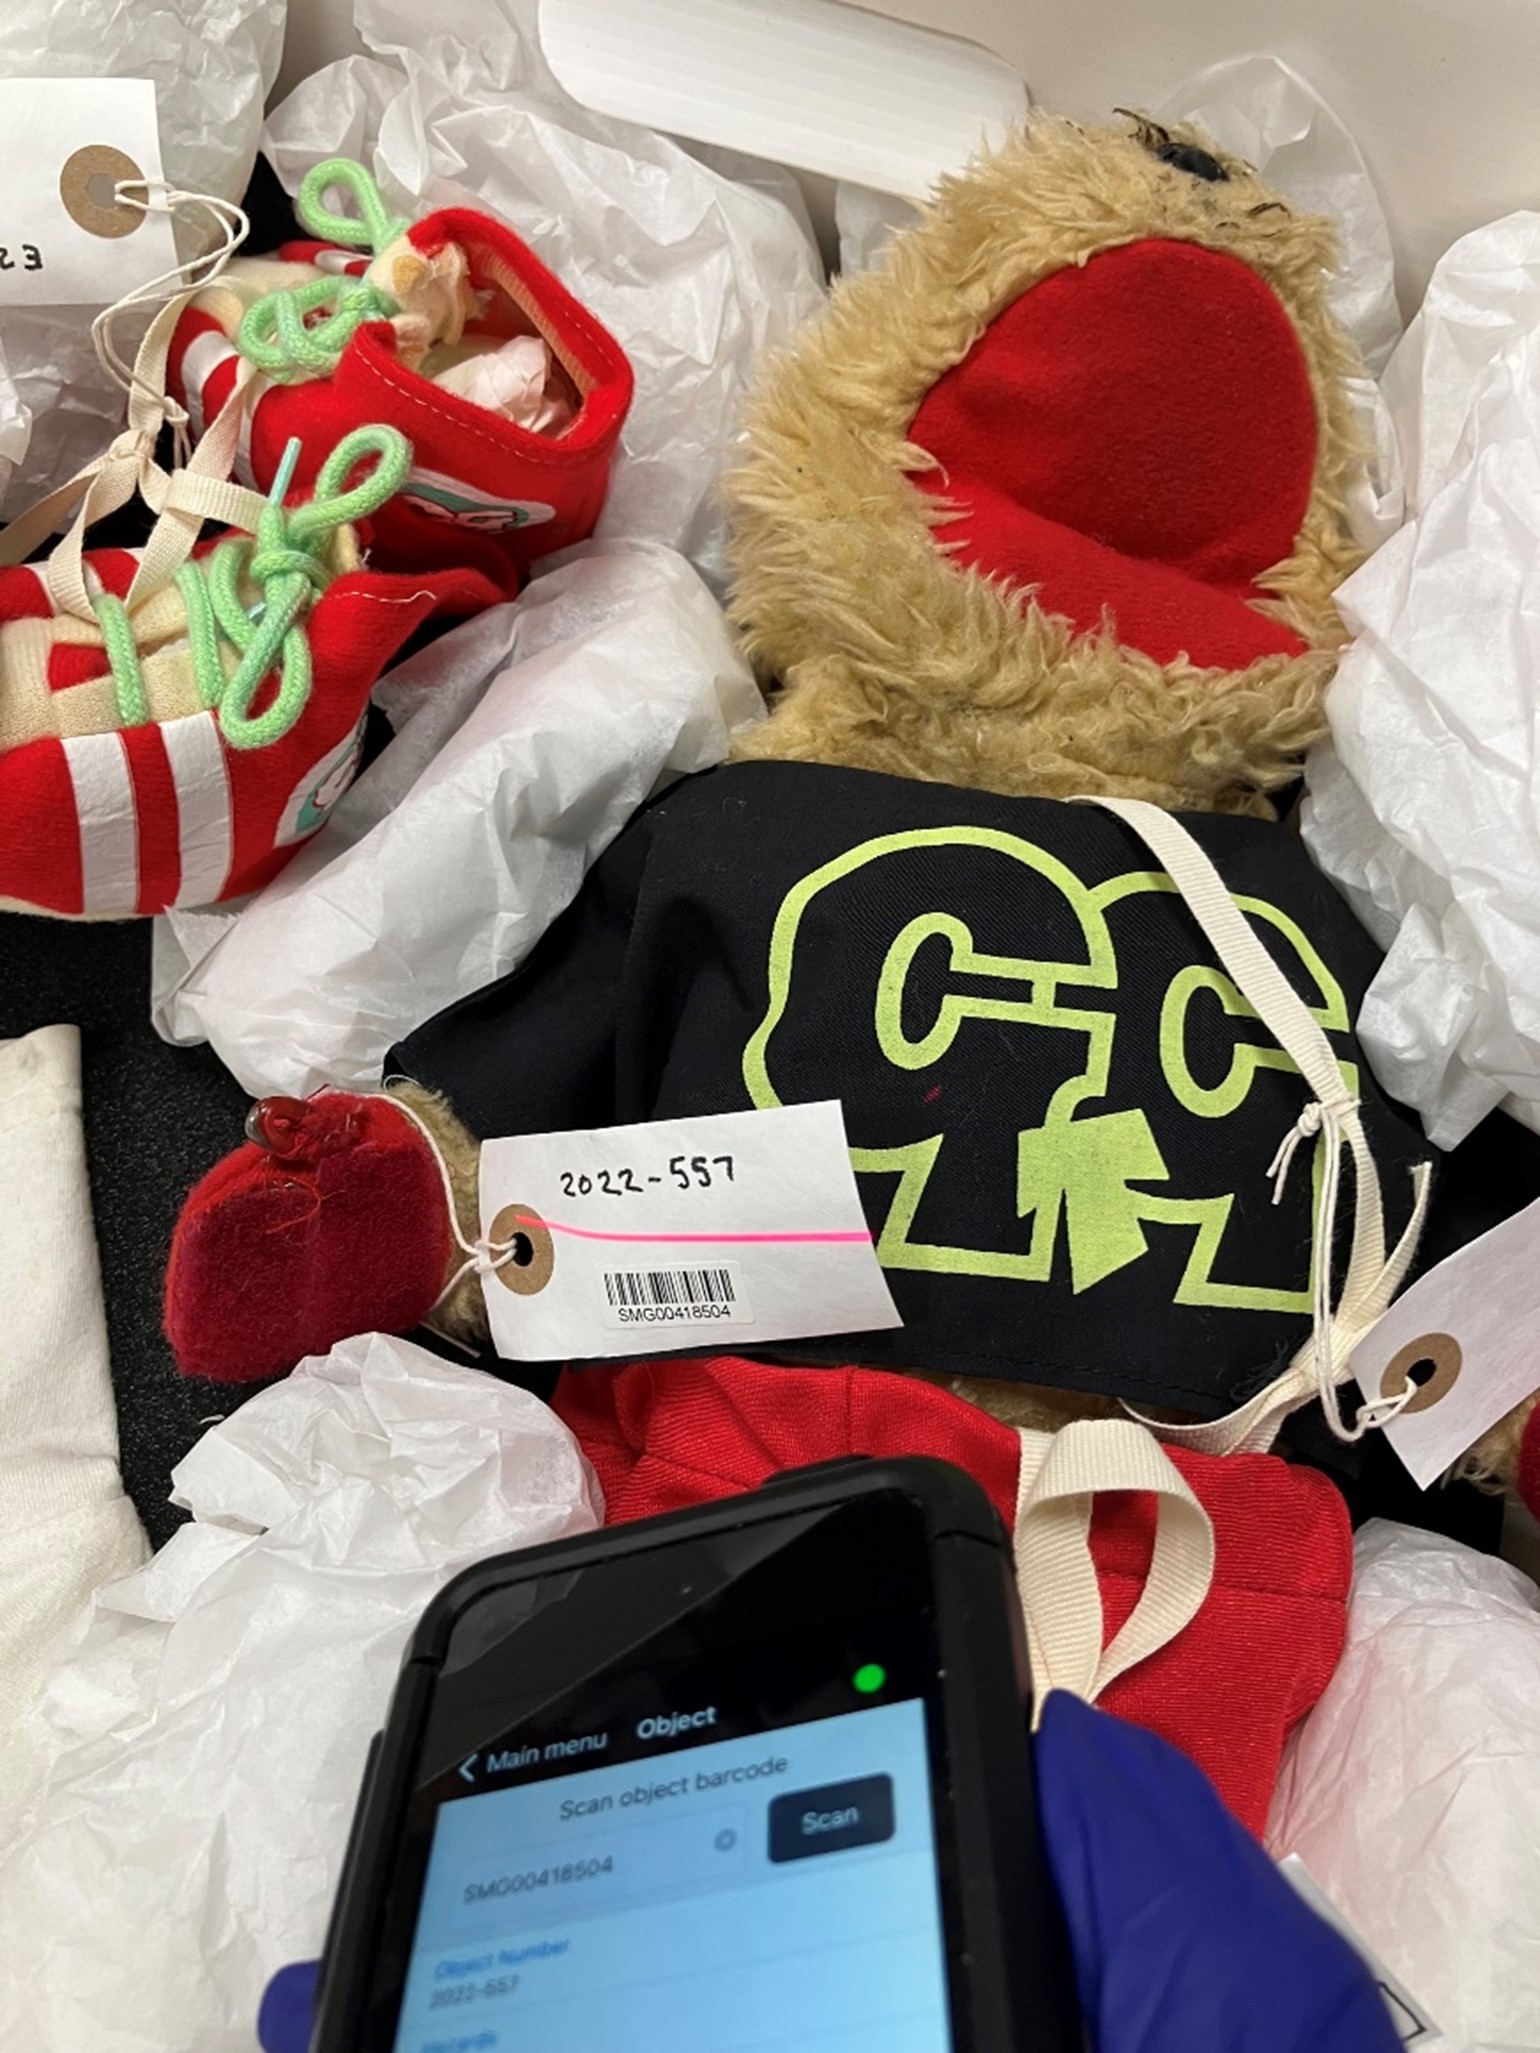 A fluffy toy gopher and his red shoes pack in tissue paper, with a gloved hand holding a smart device for cataloguing